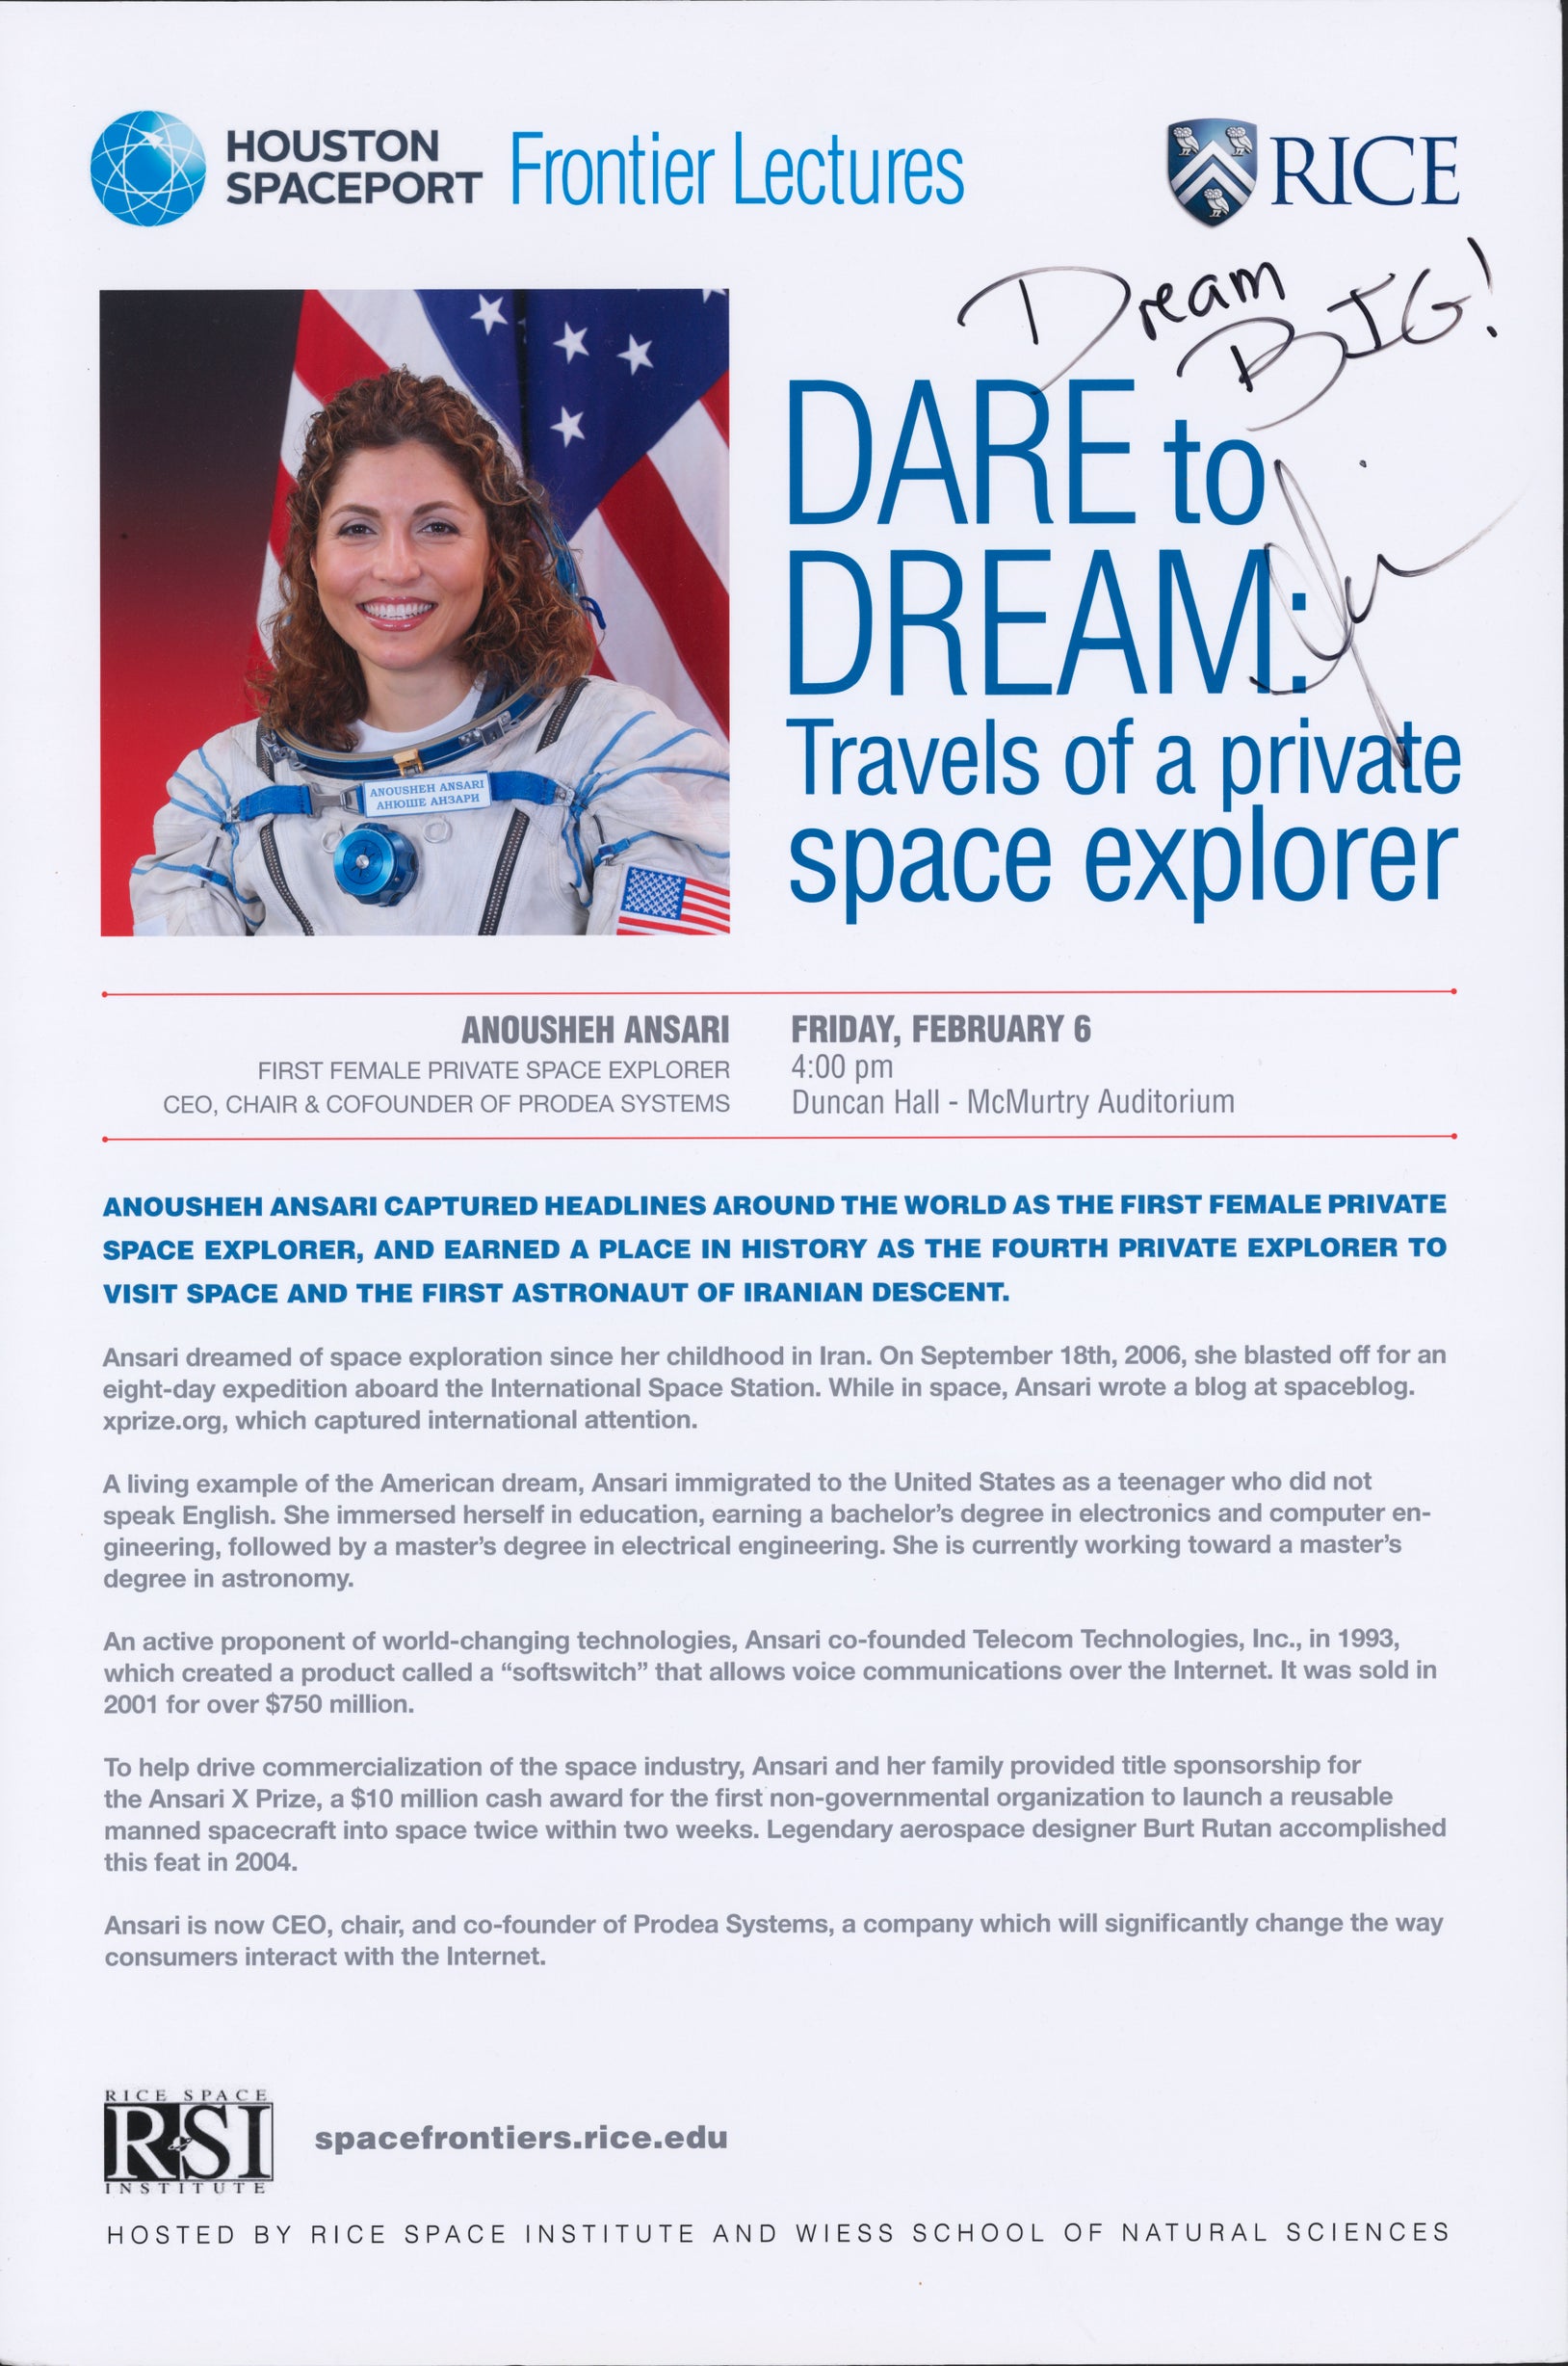 Anousheh Ansari captured headlines around the world as the first female private space explorer and earned a place in history as the fourth private explorer to visit space and the first astronaut of Iranian descent.